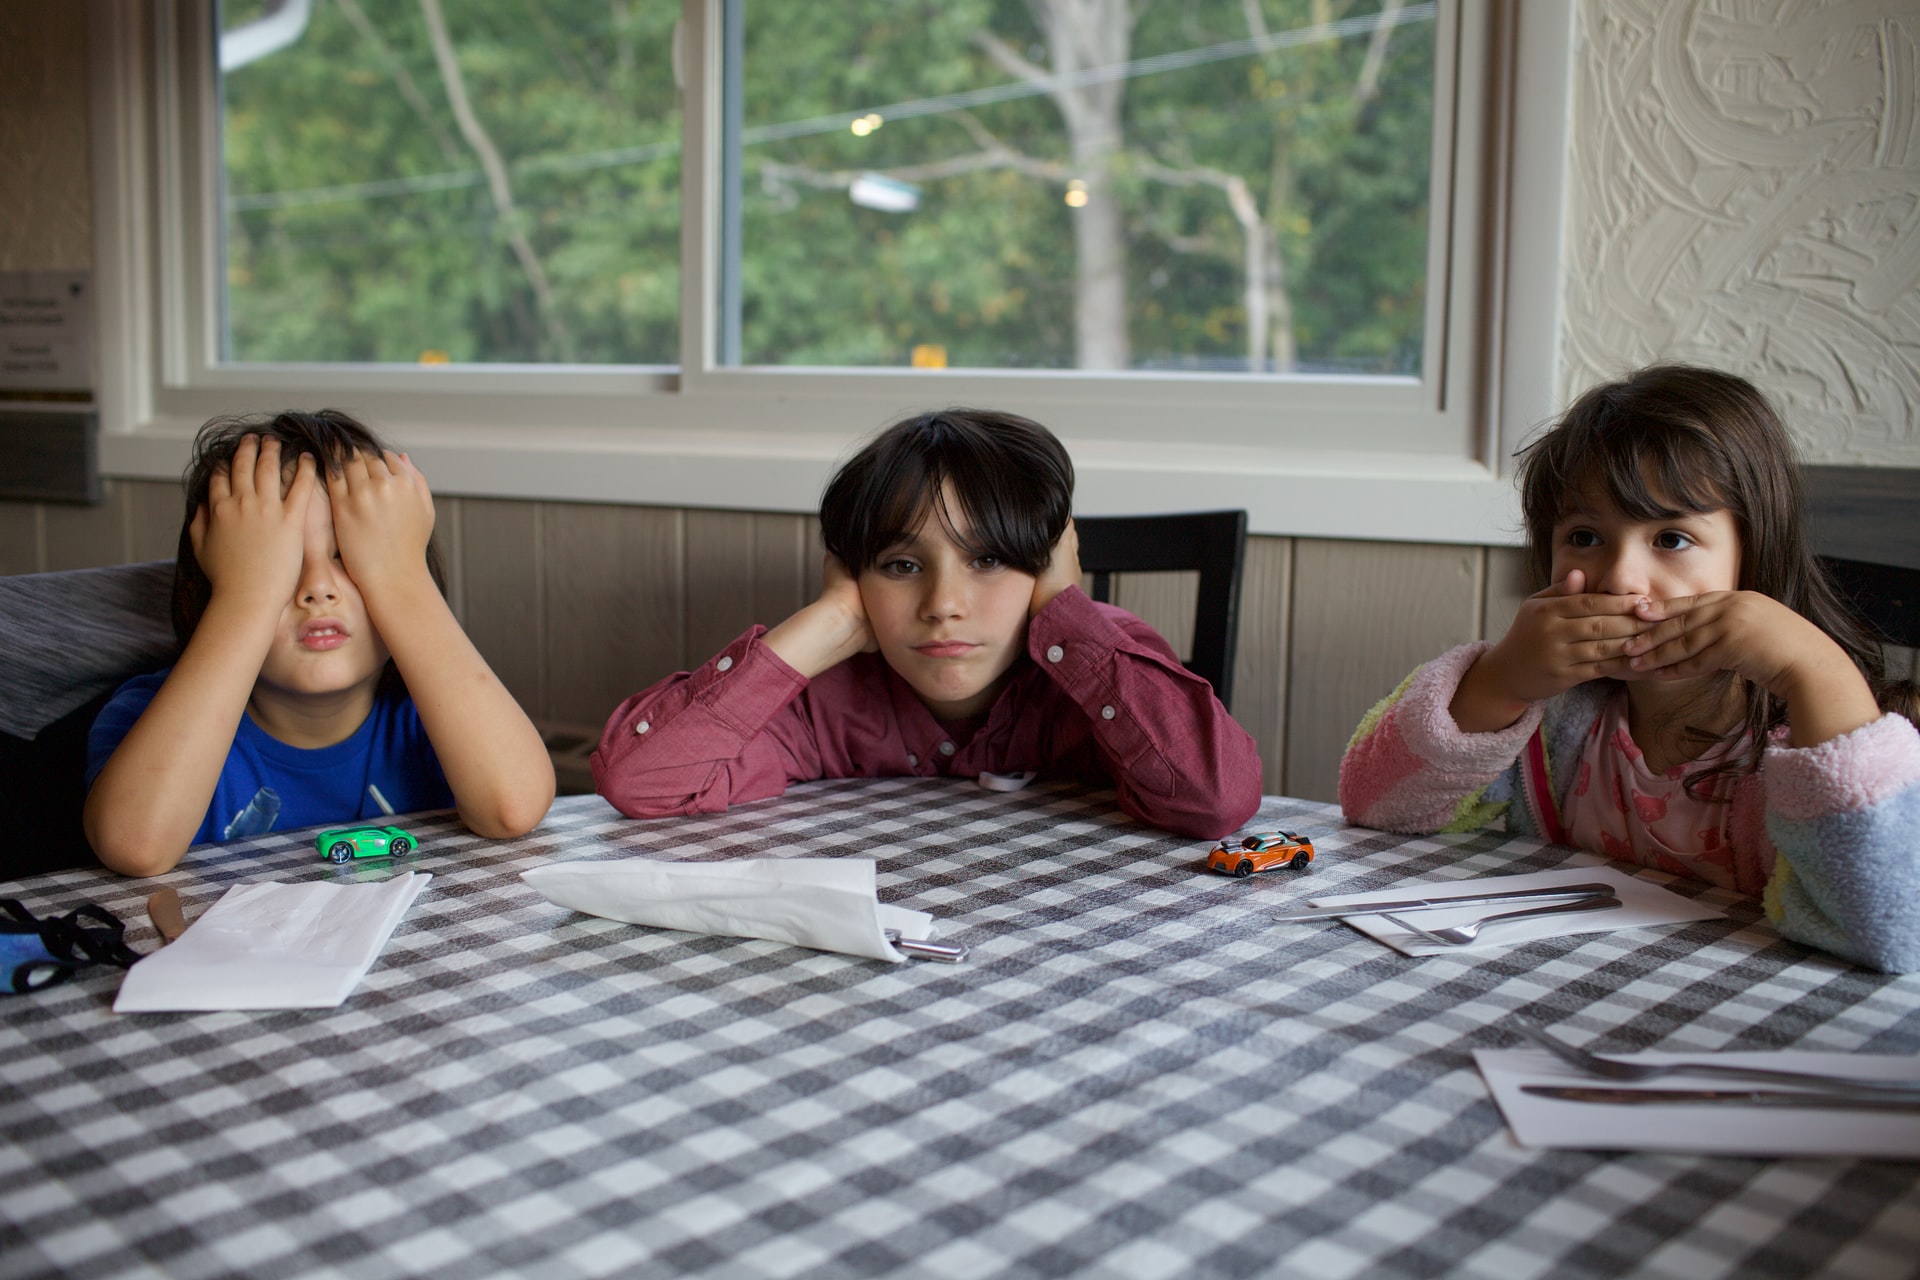 Thre kids sit at a table covering their eyes, ears, and nose